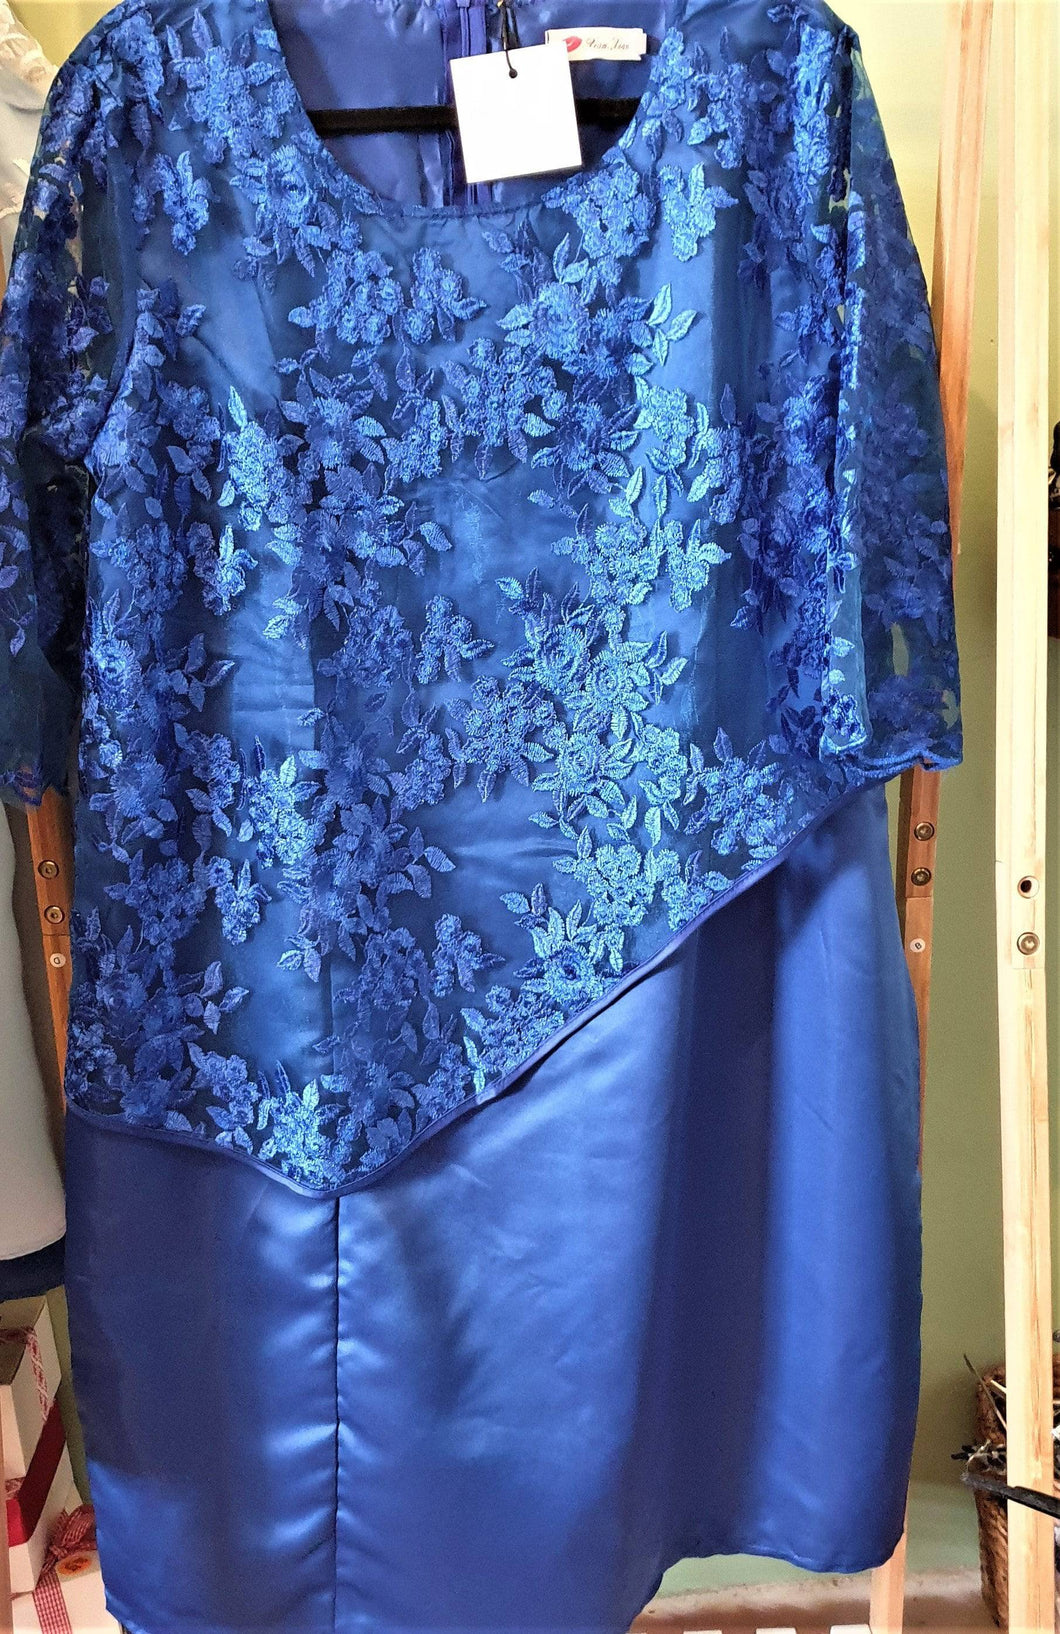 Women's Formal Dress Embroidered Royal Blue Satin Look Lace Look Top. - Tracey Glynn Fashions